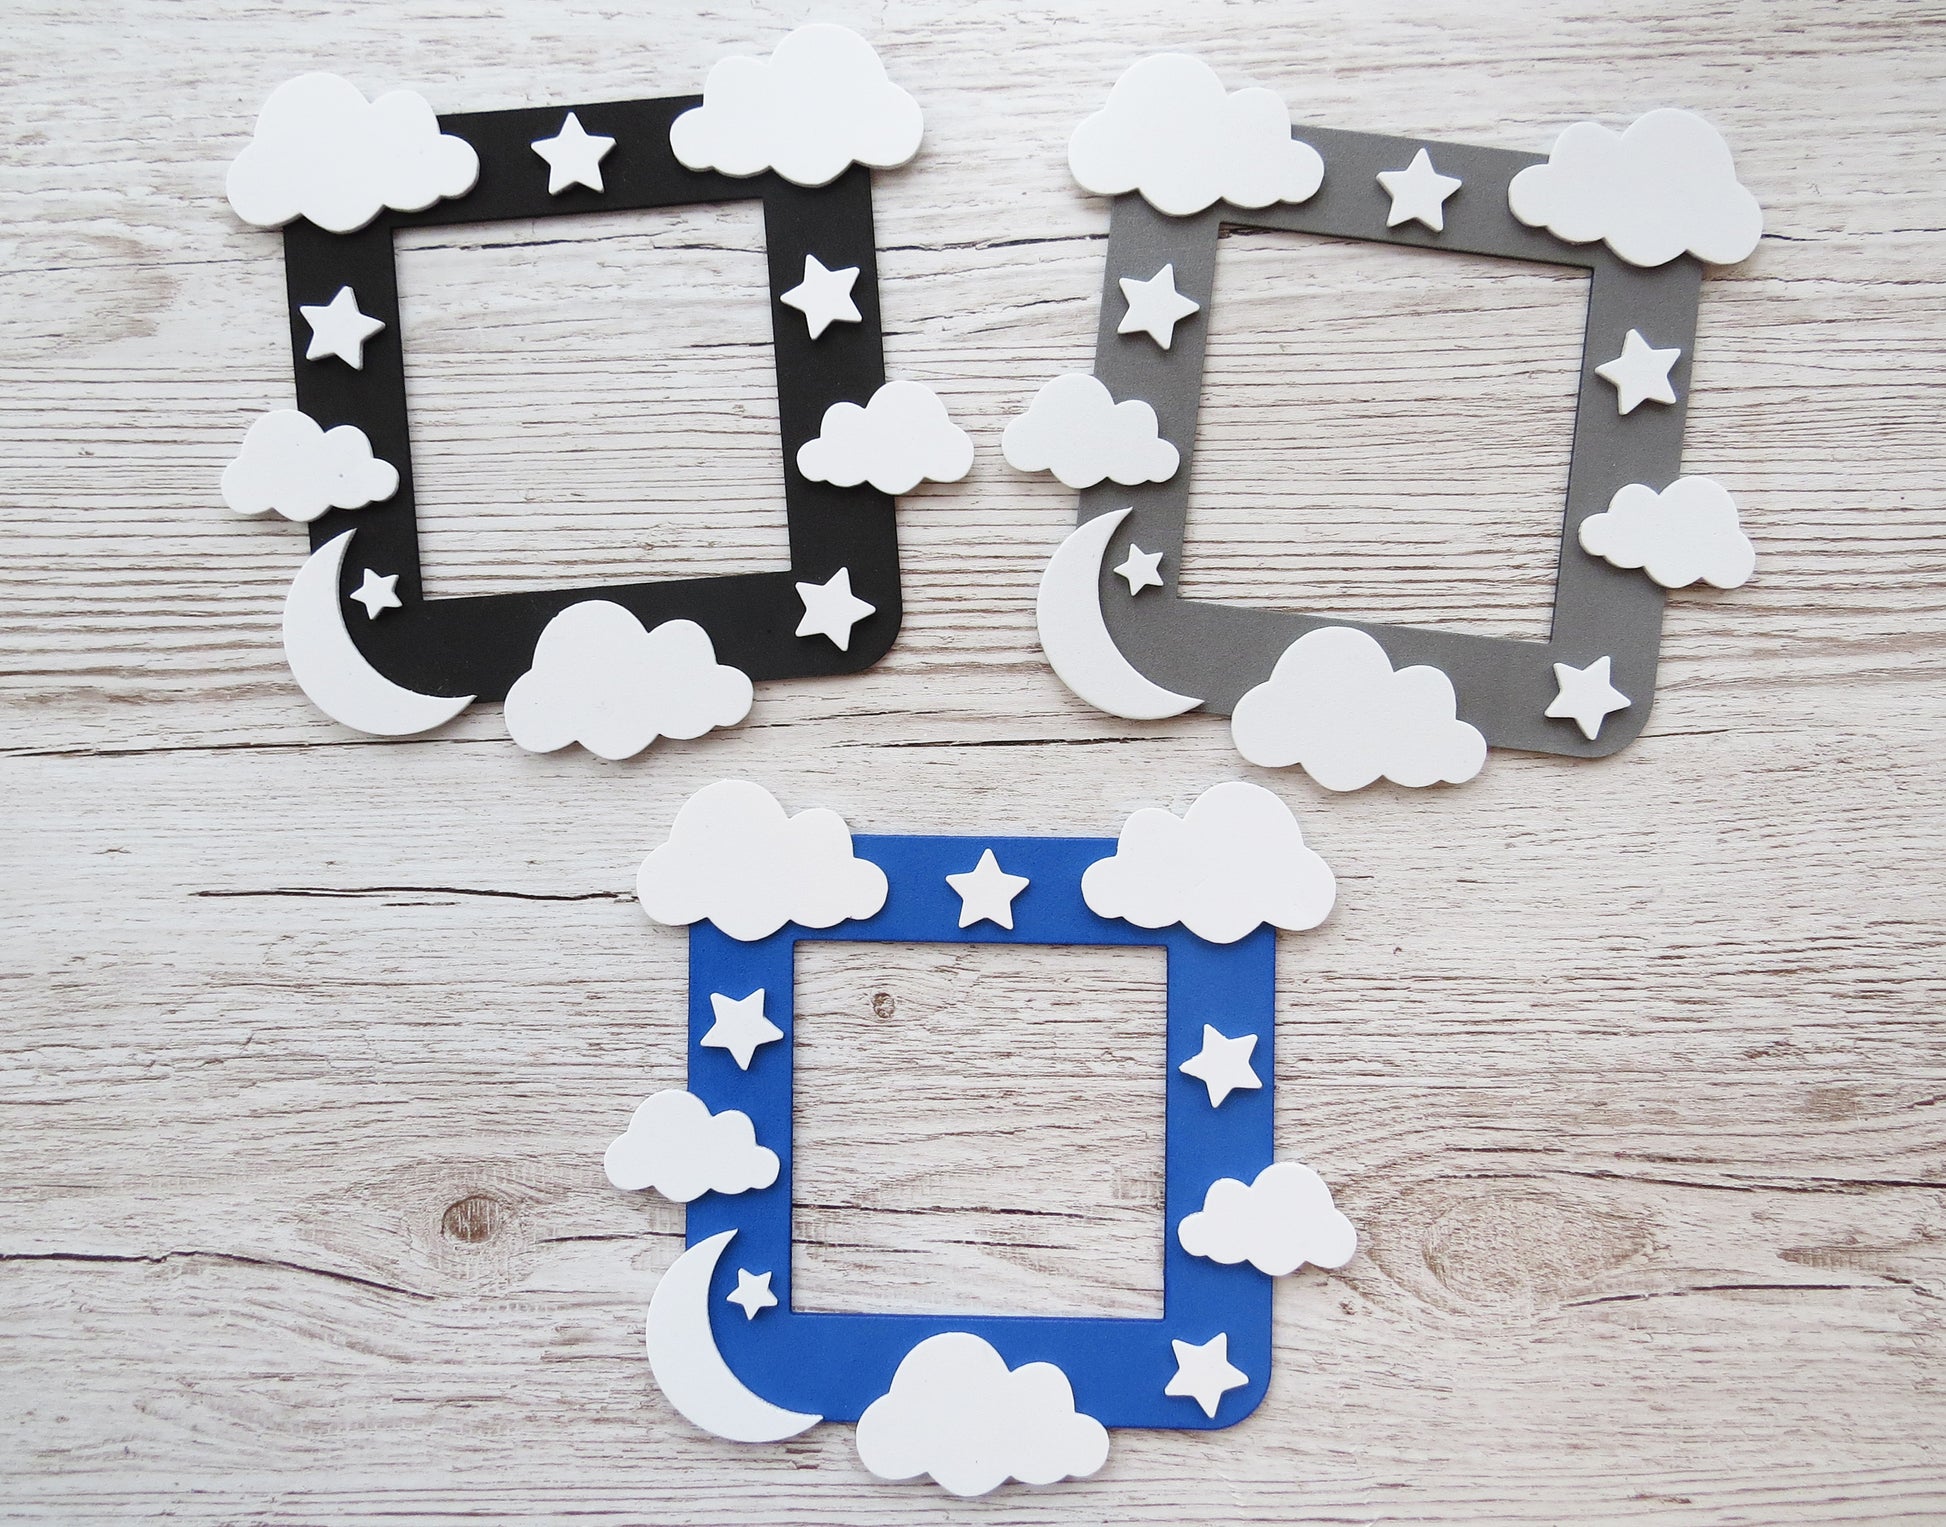 Craft foam light switch surround designed with clouds, stars  and a moon.